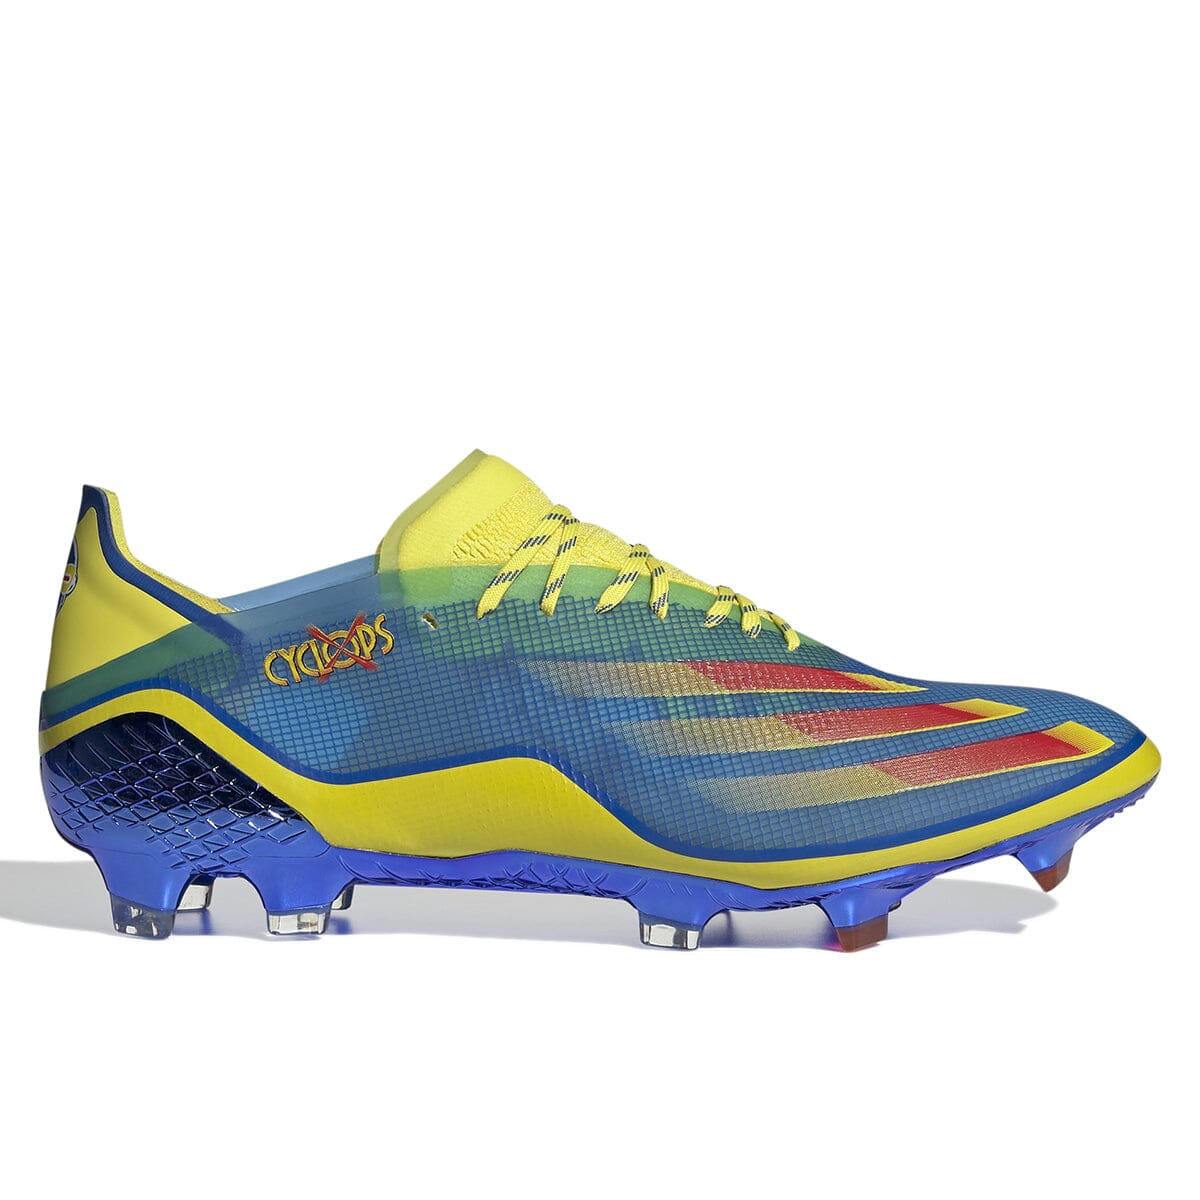 adidas Men's X GHOSTED.1 Firm Ground Cleats | FY1223 Cleats Adidas 6 Blue / Vivid Red / Bright Yellow 